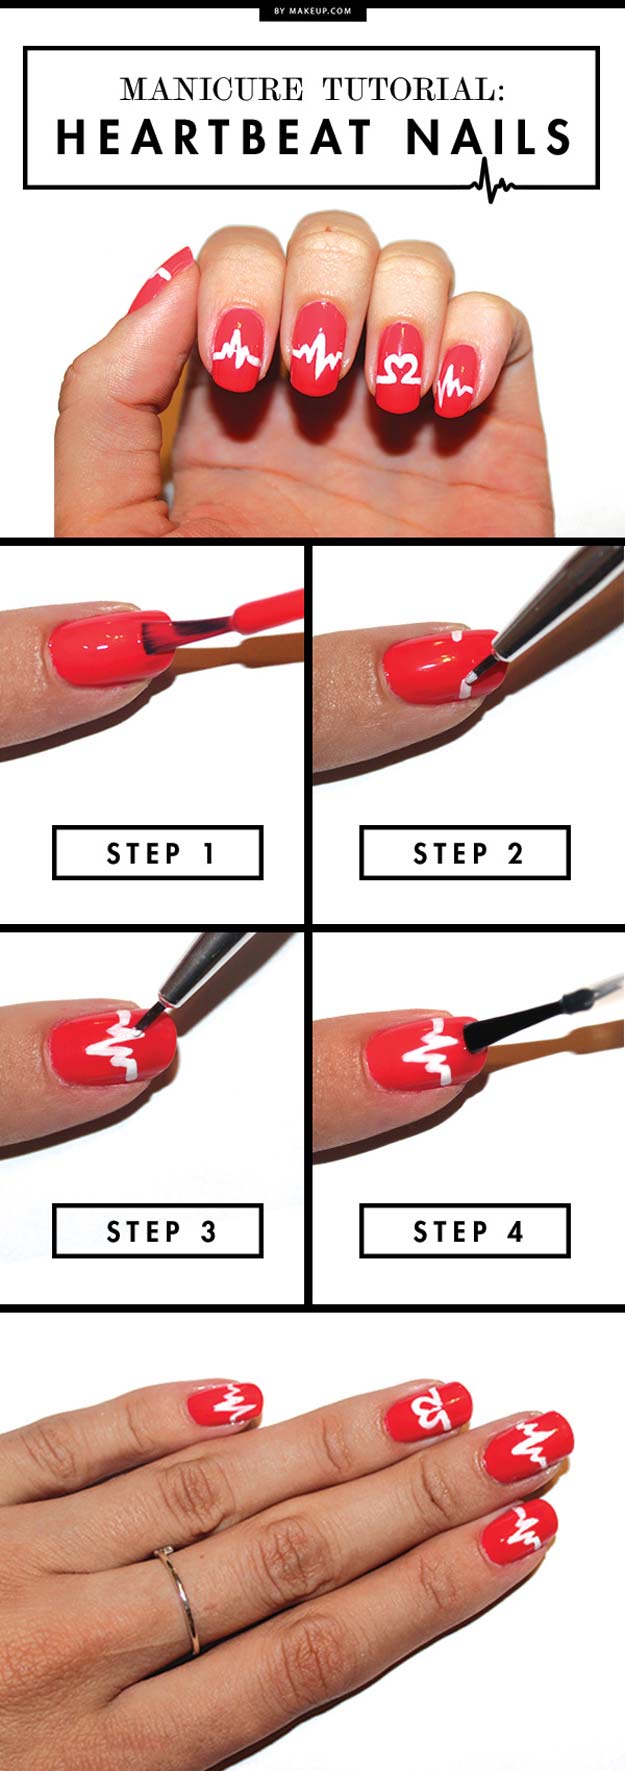 Valentine Nail Art Ideas - Heartbeat Nails - Cute and Cool Looks For Valentines Day Nails - Hearts, Gradients, Red, Black and Pink Designs - Easy Ideas for DIY Manicures with Step by Step Tutorials - Fun Ideas for Teens, Teenagers and Women 